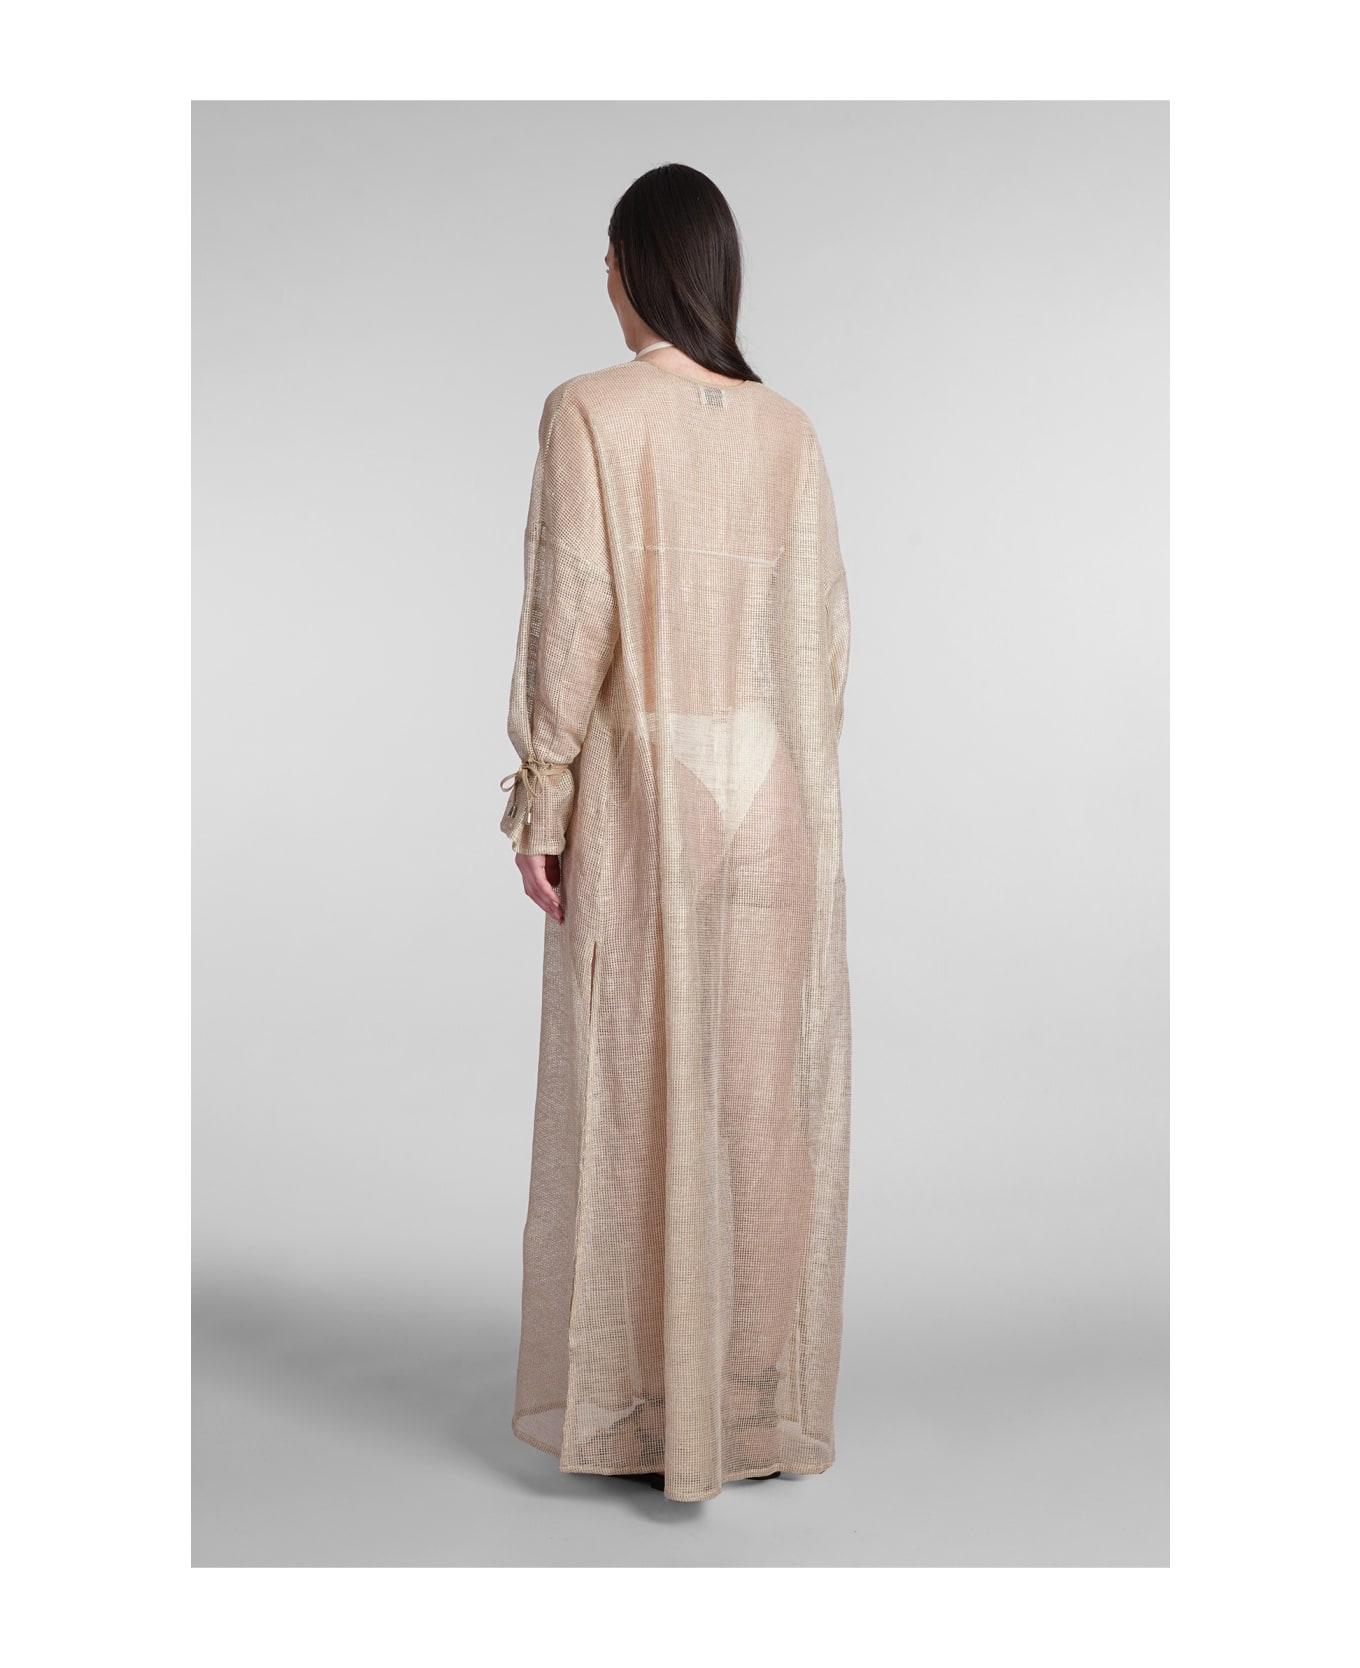 Holy Caftan Aminta Rt Dress In Gold Linen - gold